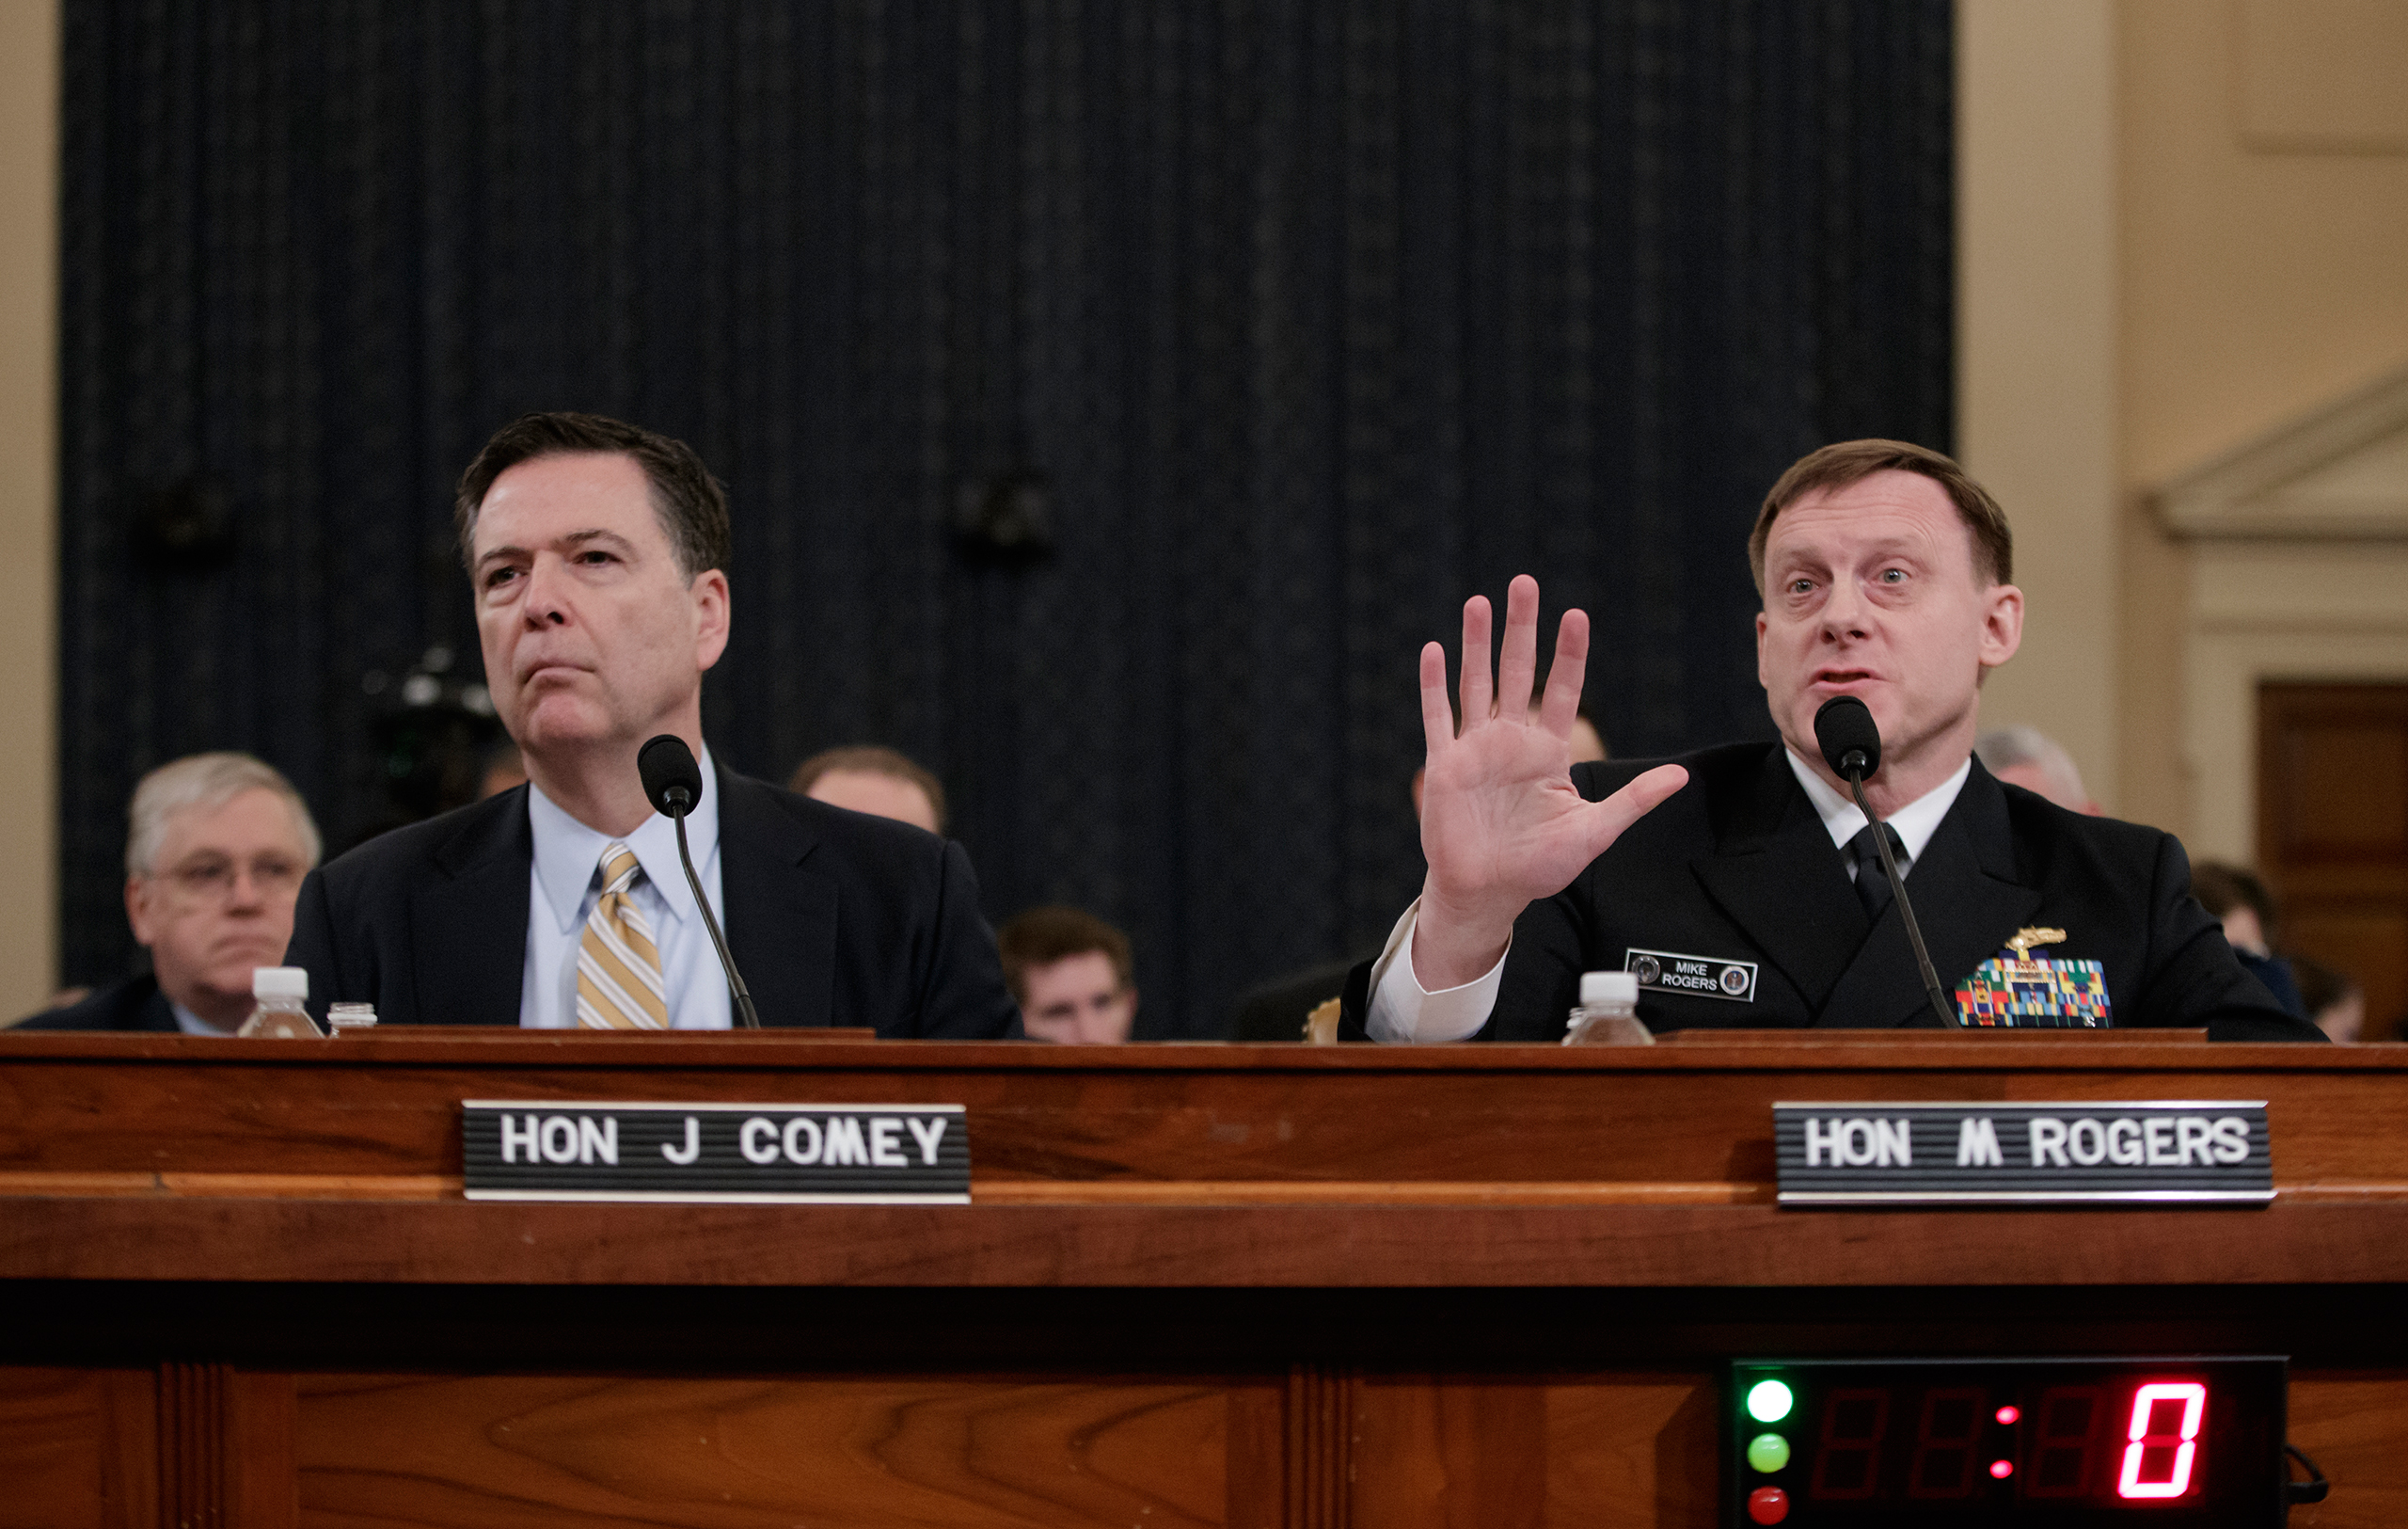 Both FBI Director Comey, left, and NSA chief Rogers said they could find no evidence for Trump's claims that Obama had bugged Trump's phone calls. (J. Scott Applewhite—AP)